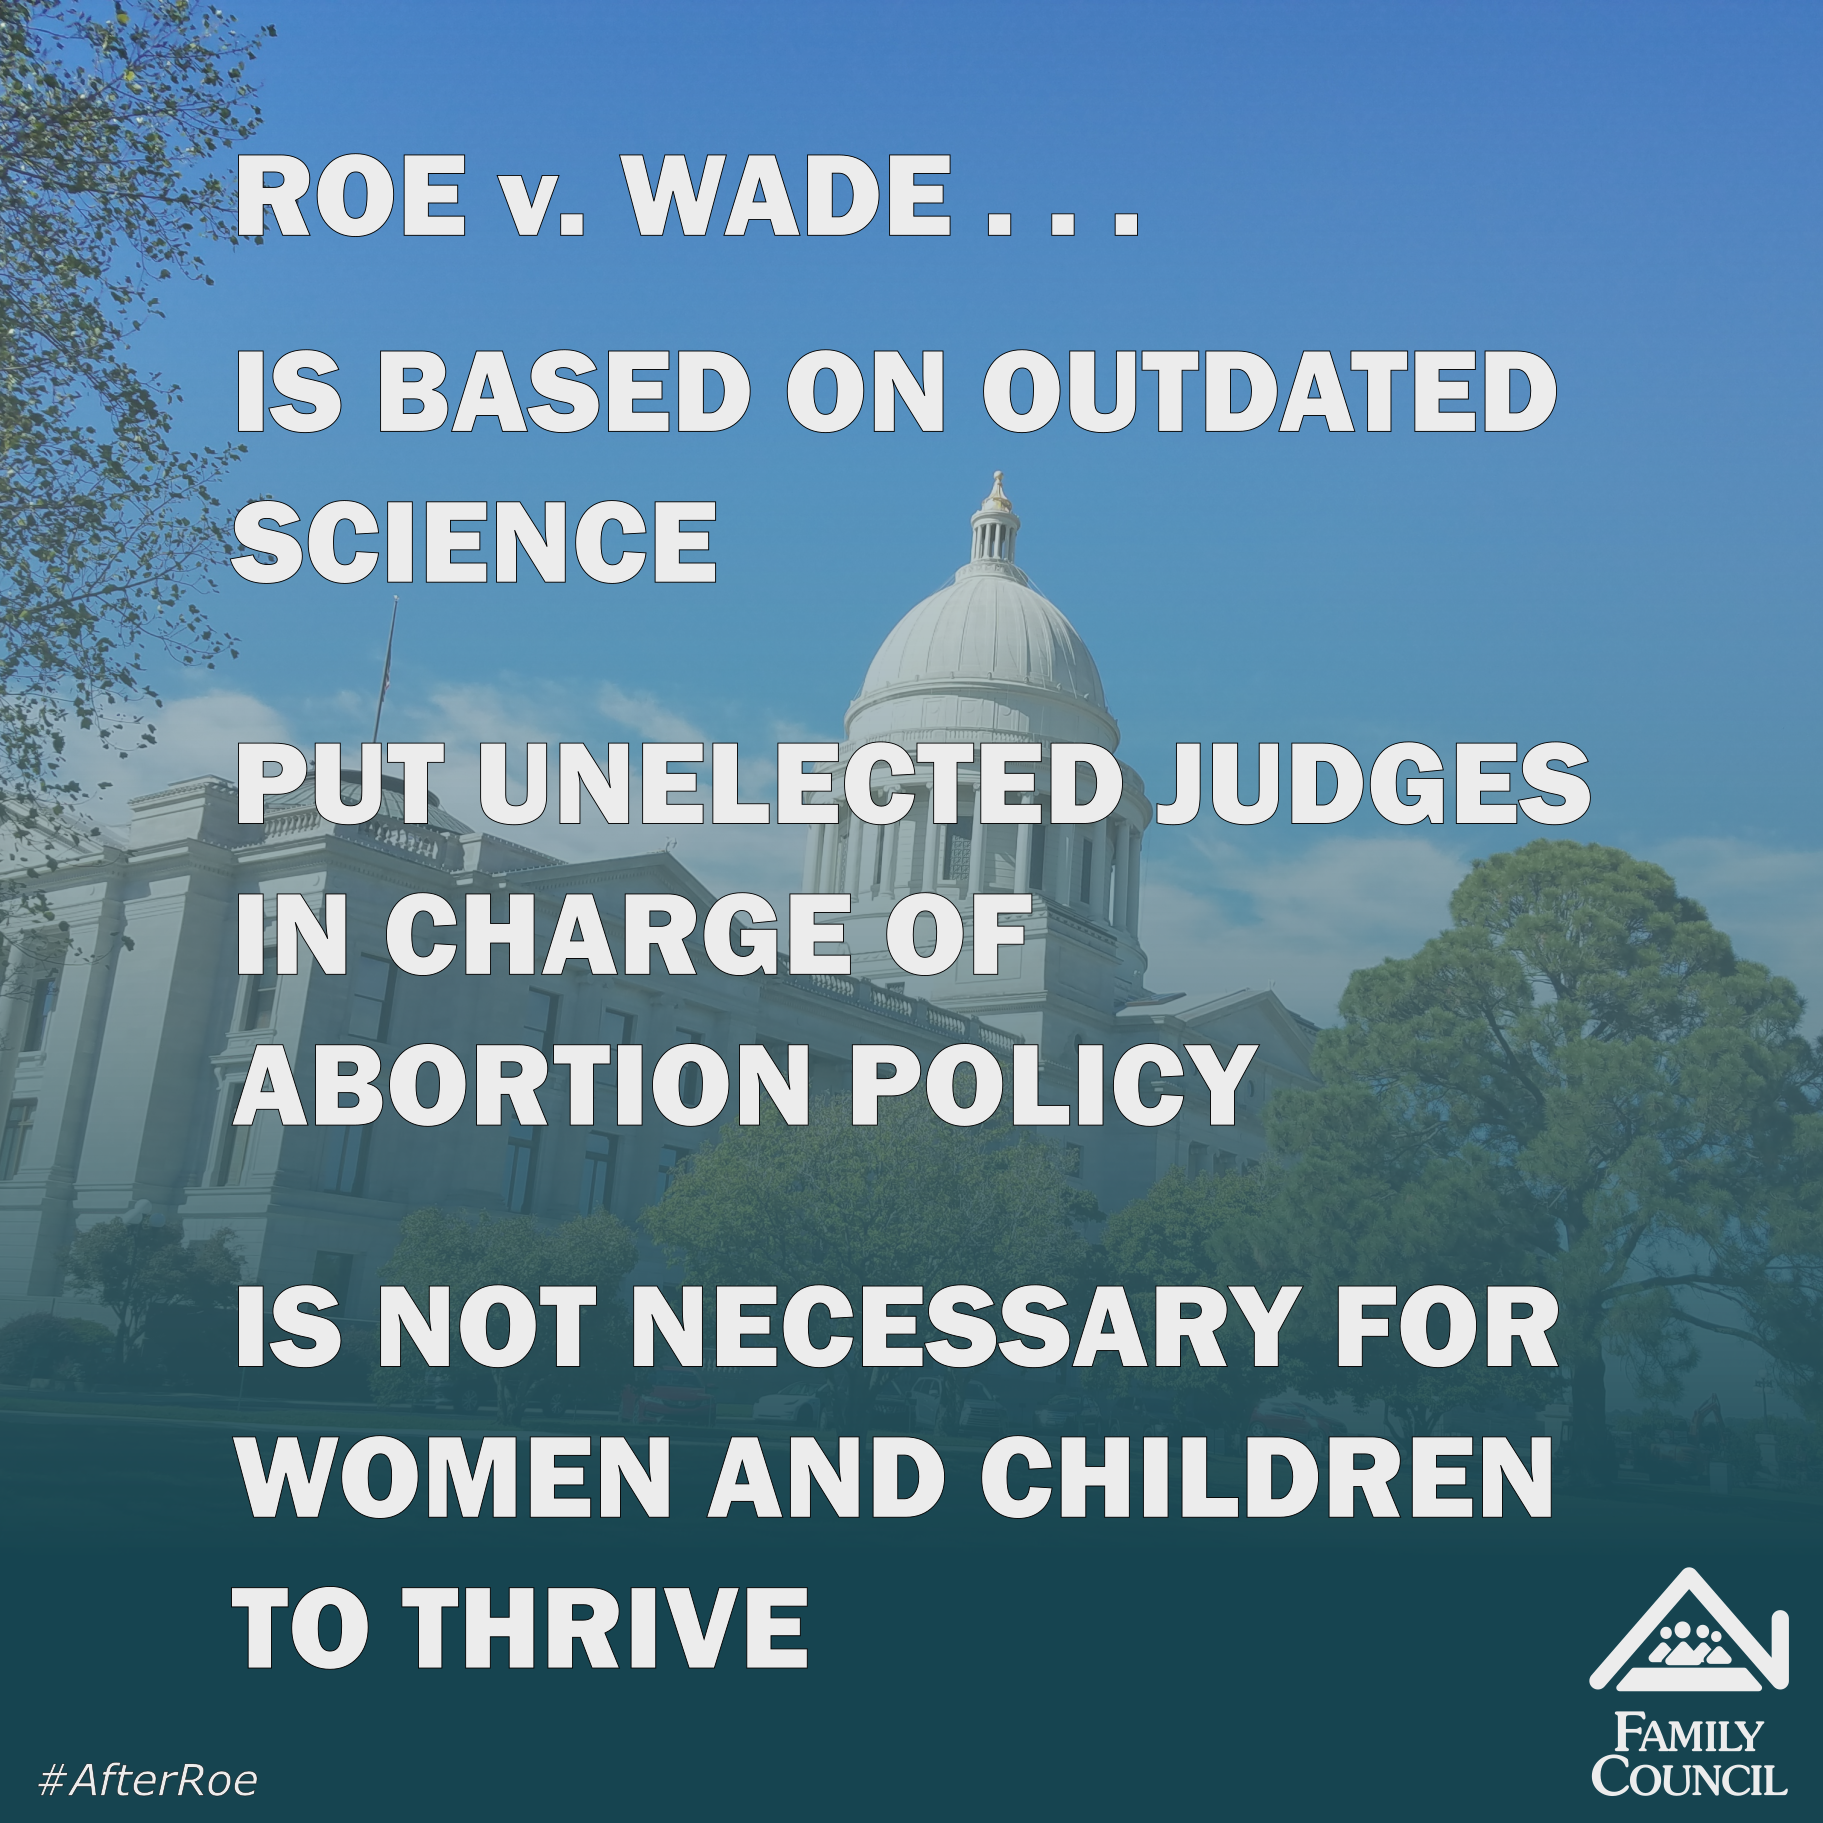 What Happens In Arkansas After Roe?